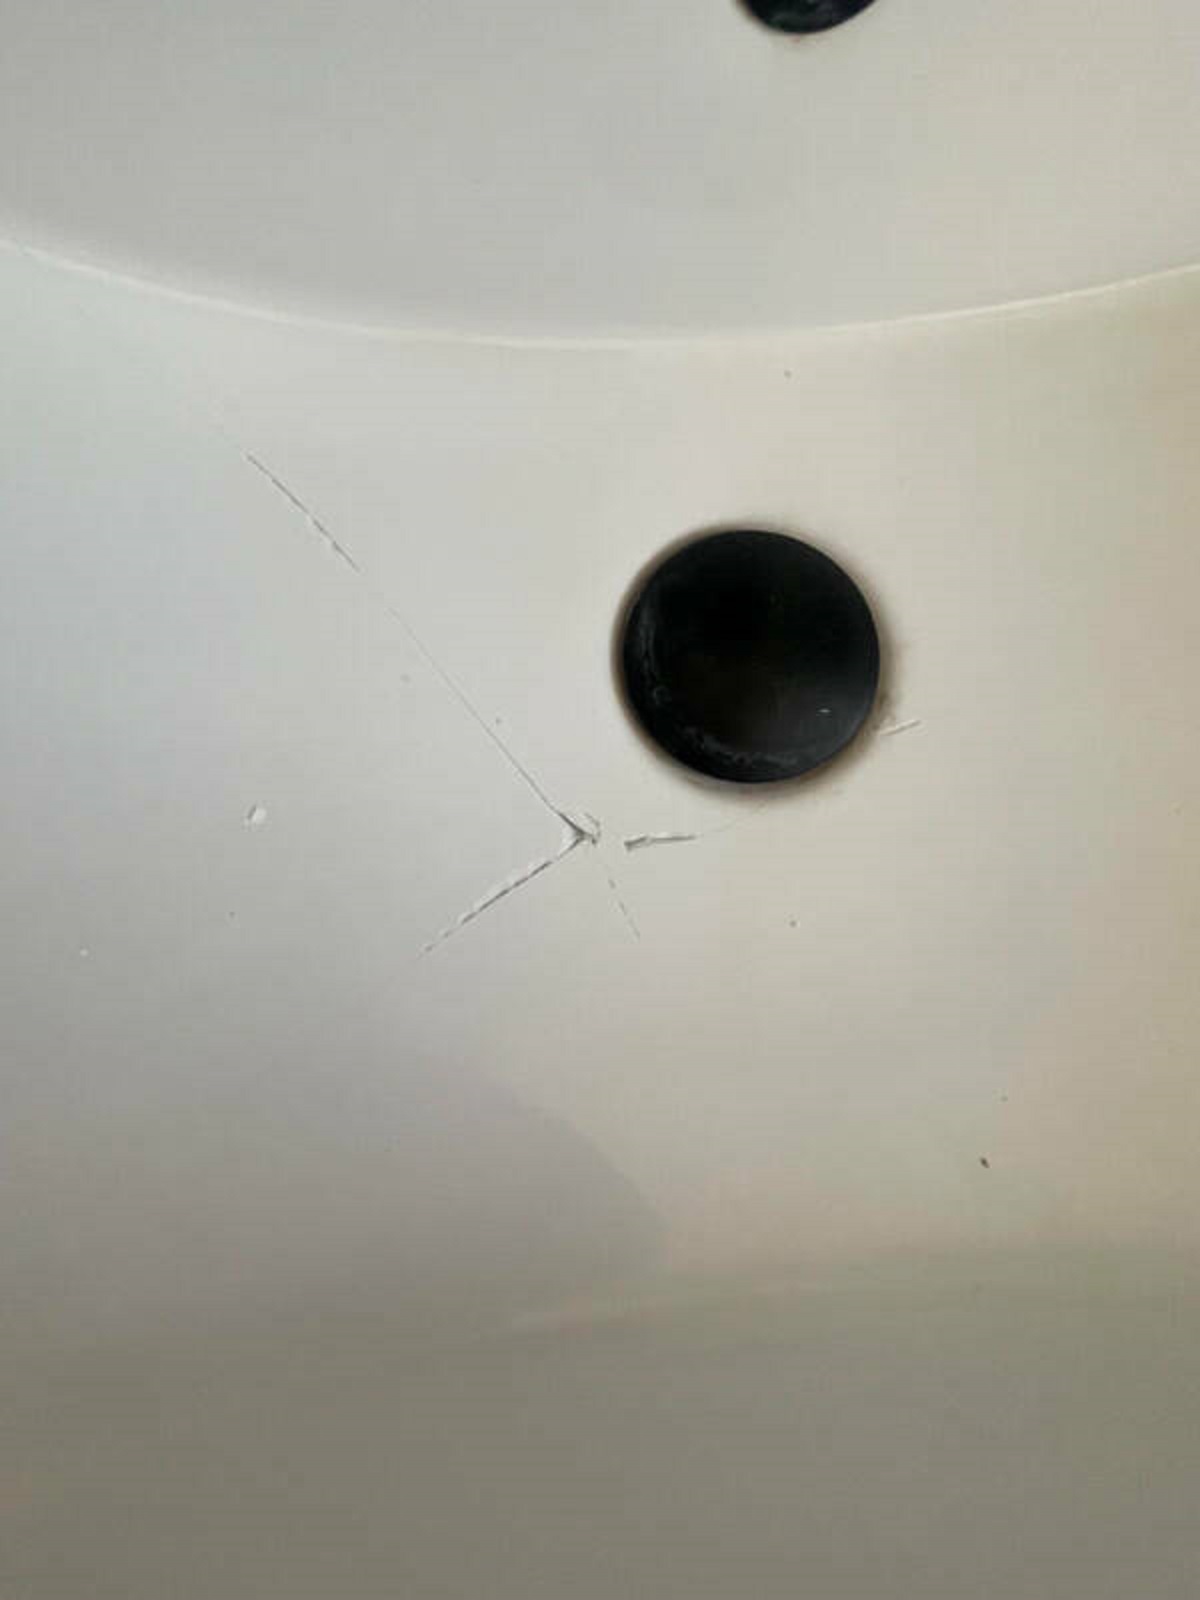 “My girlfriend’s perfume fell from the medicine cabinet and broke our sink.”